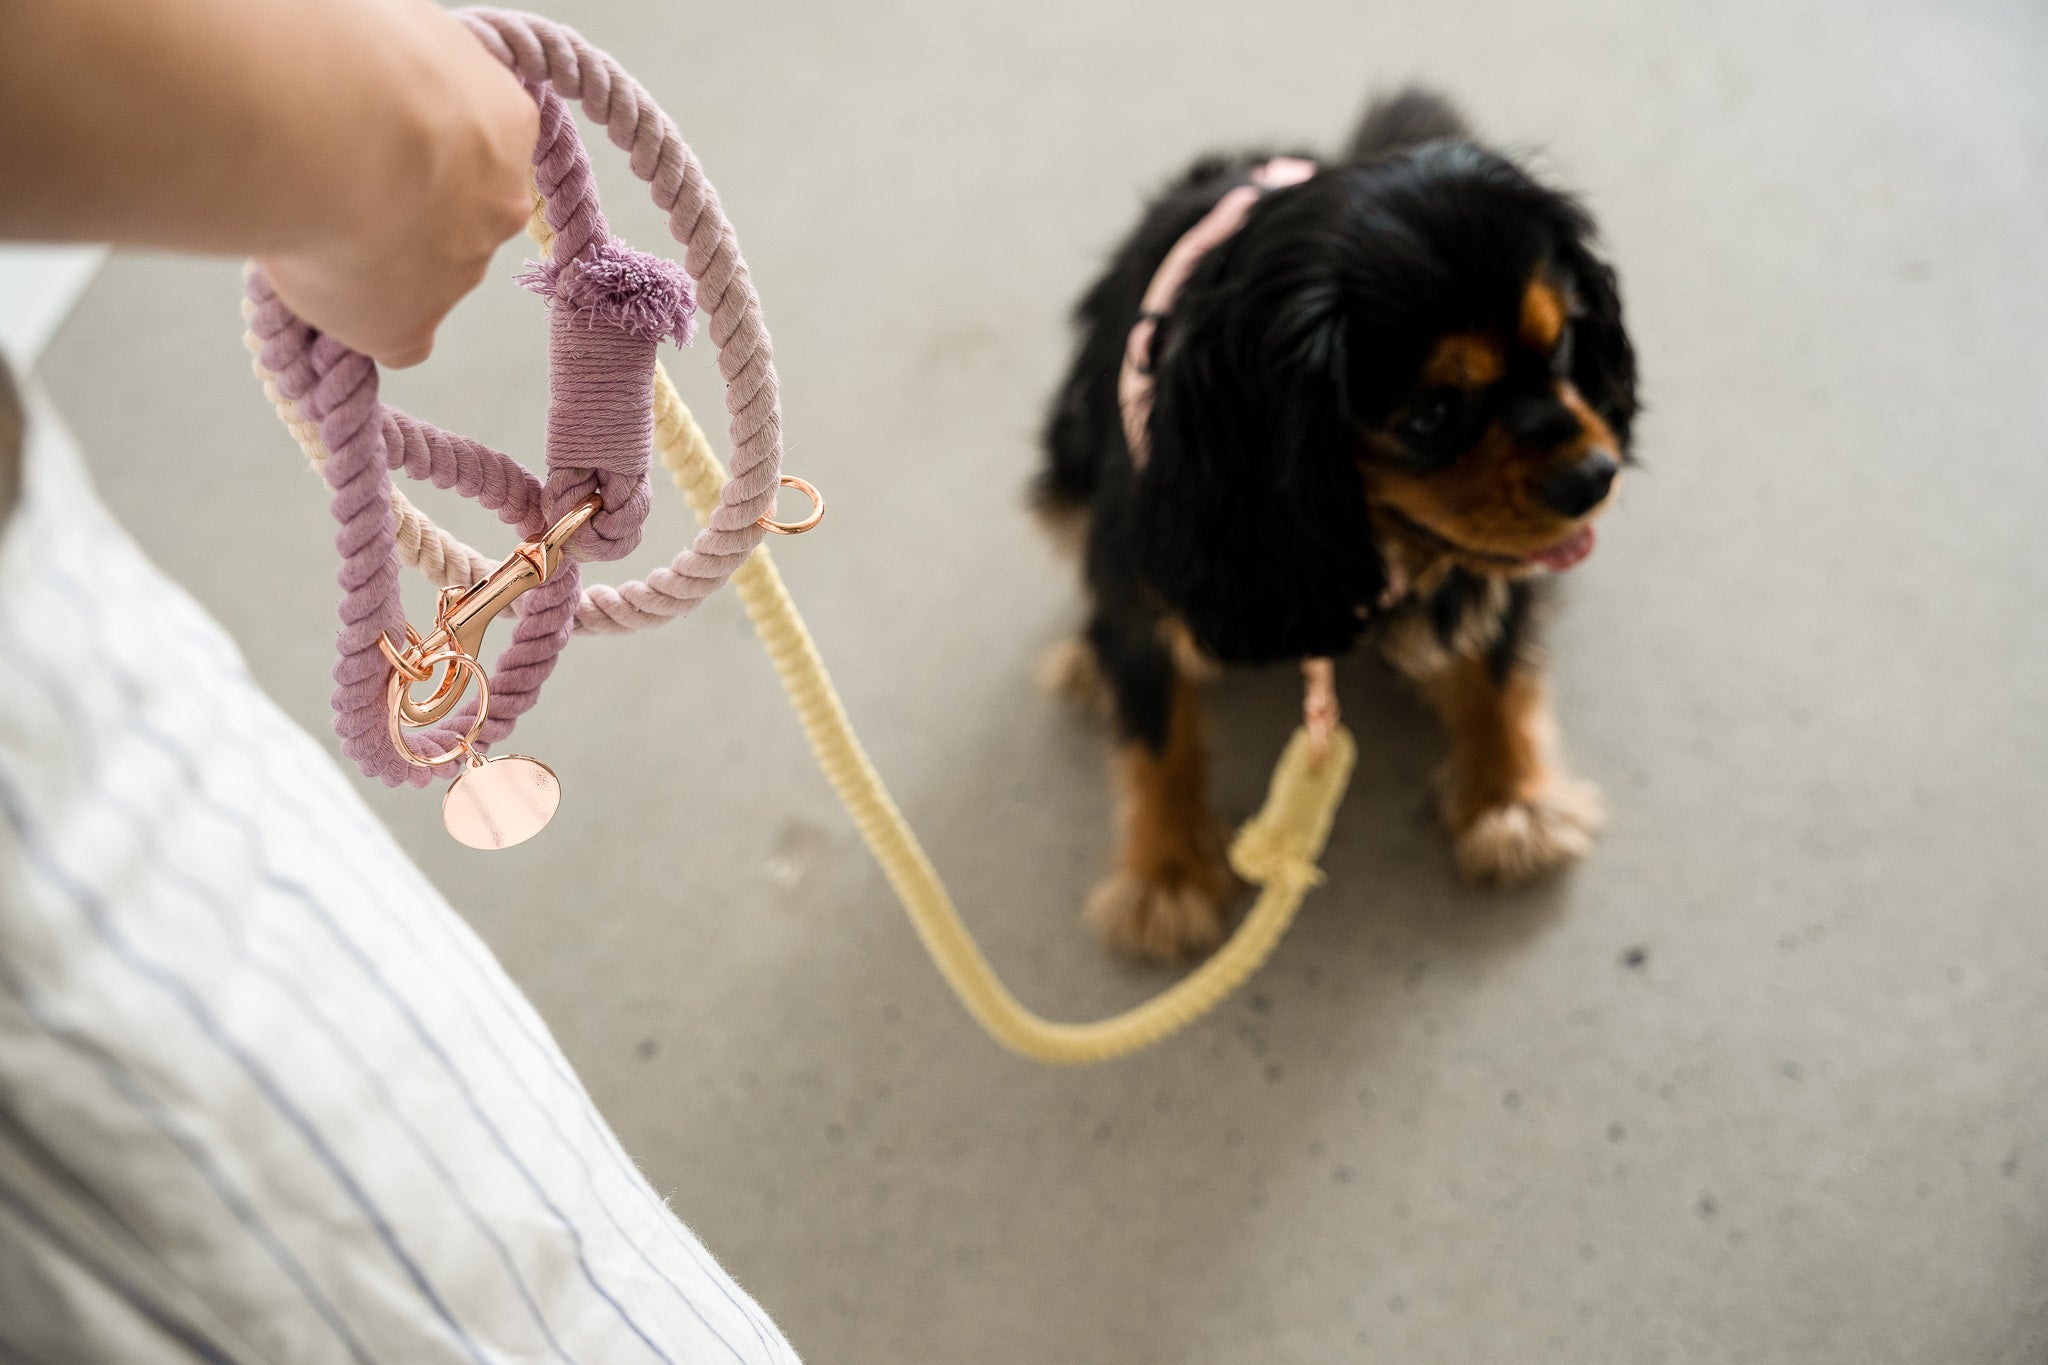 DOG LEASH HANDS FREE COTTON ROPE - Ombré Pink Yellow "Pink Lemonade"